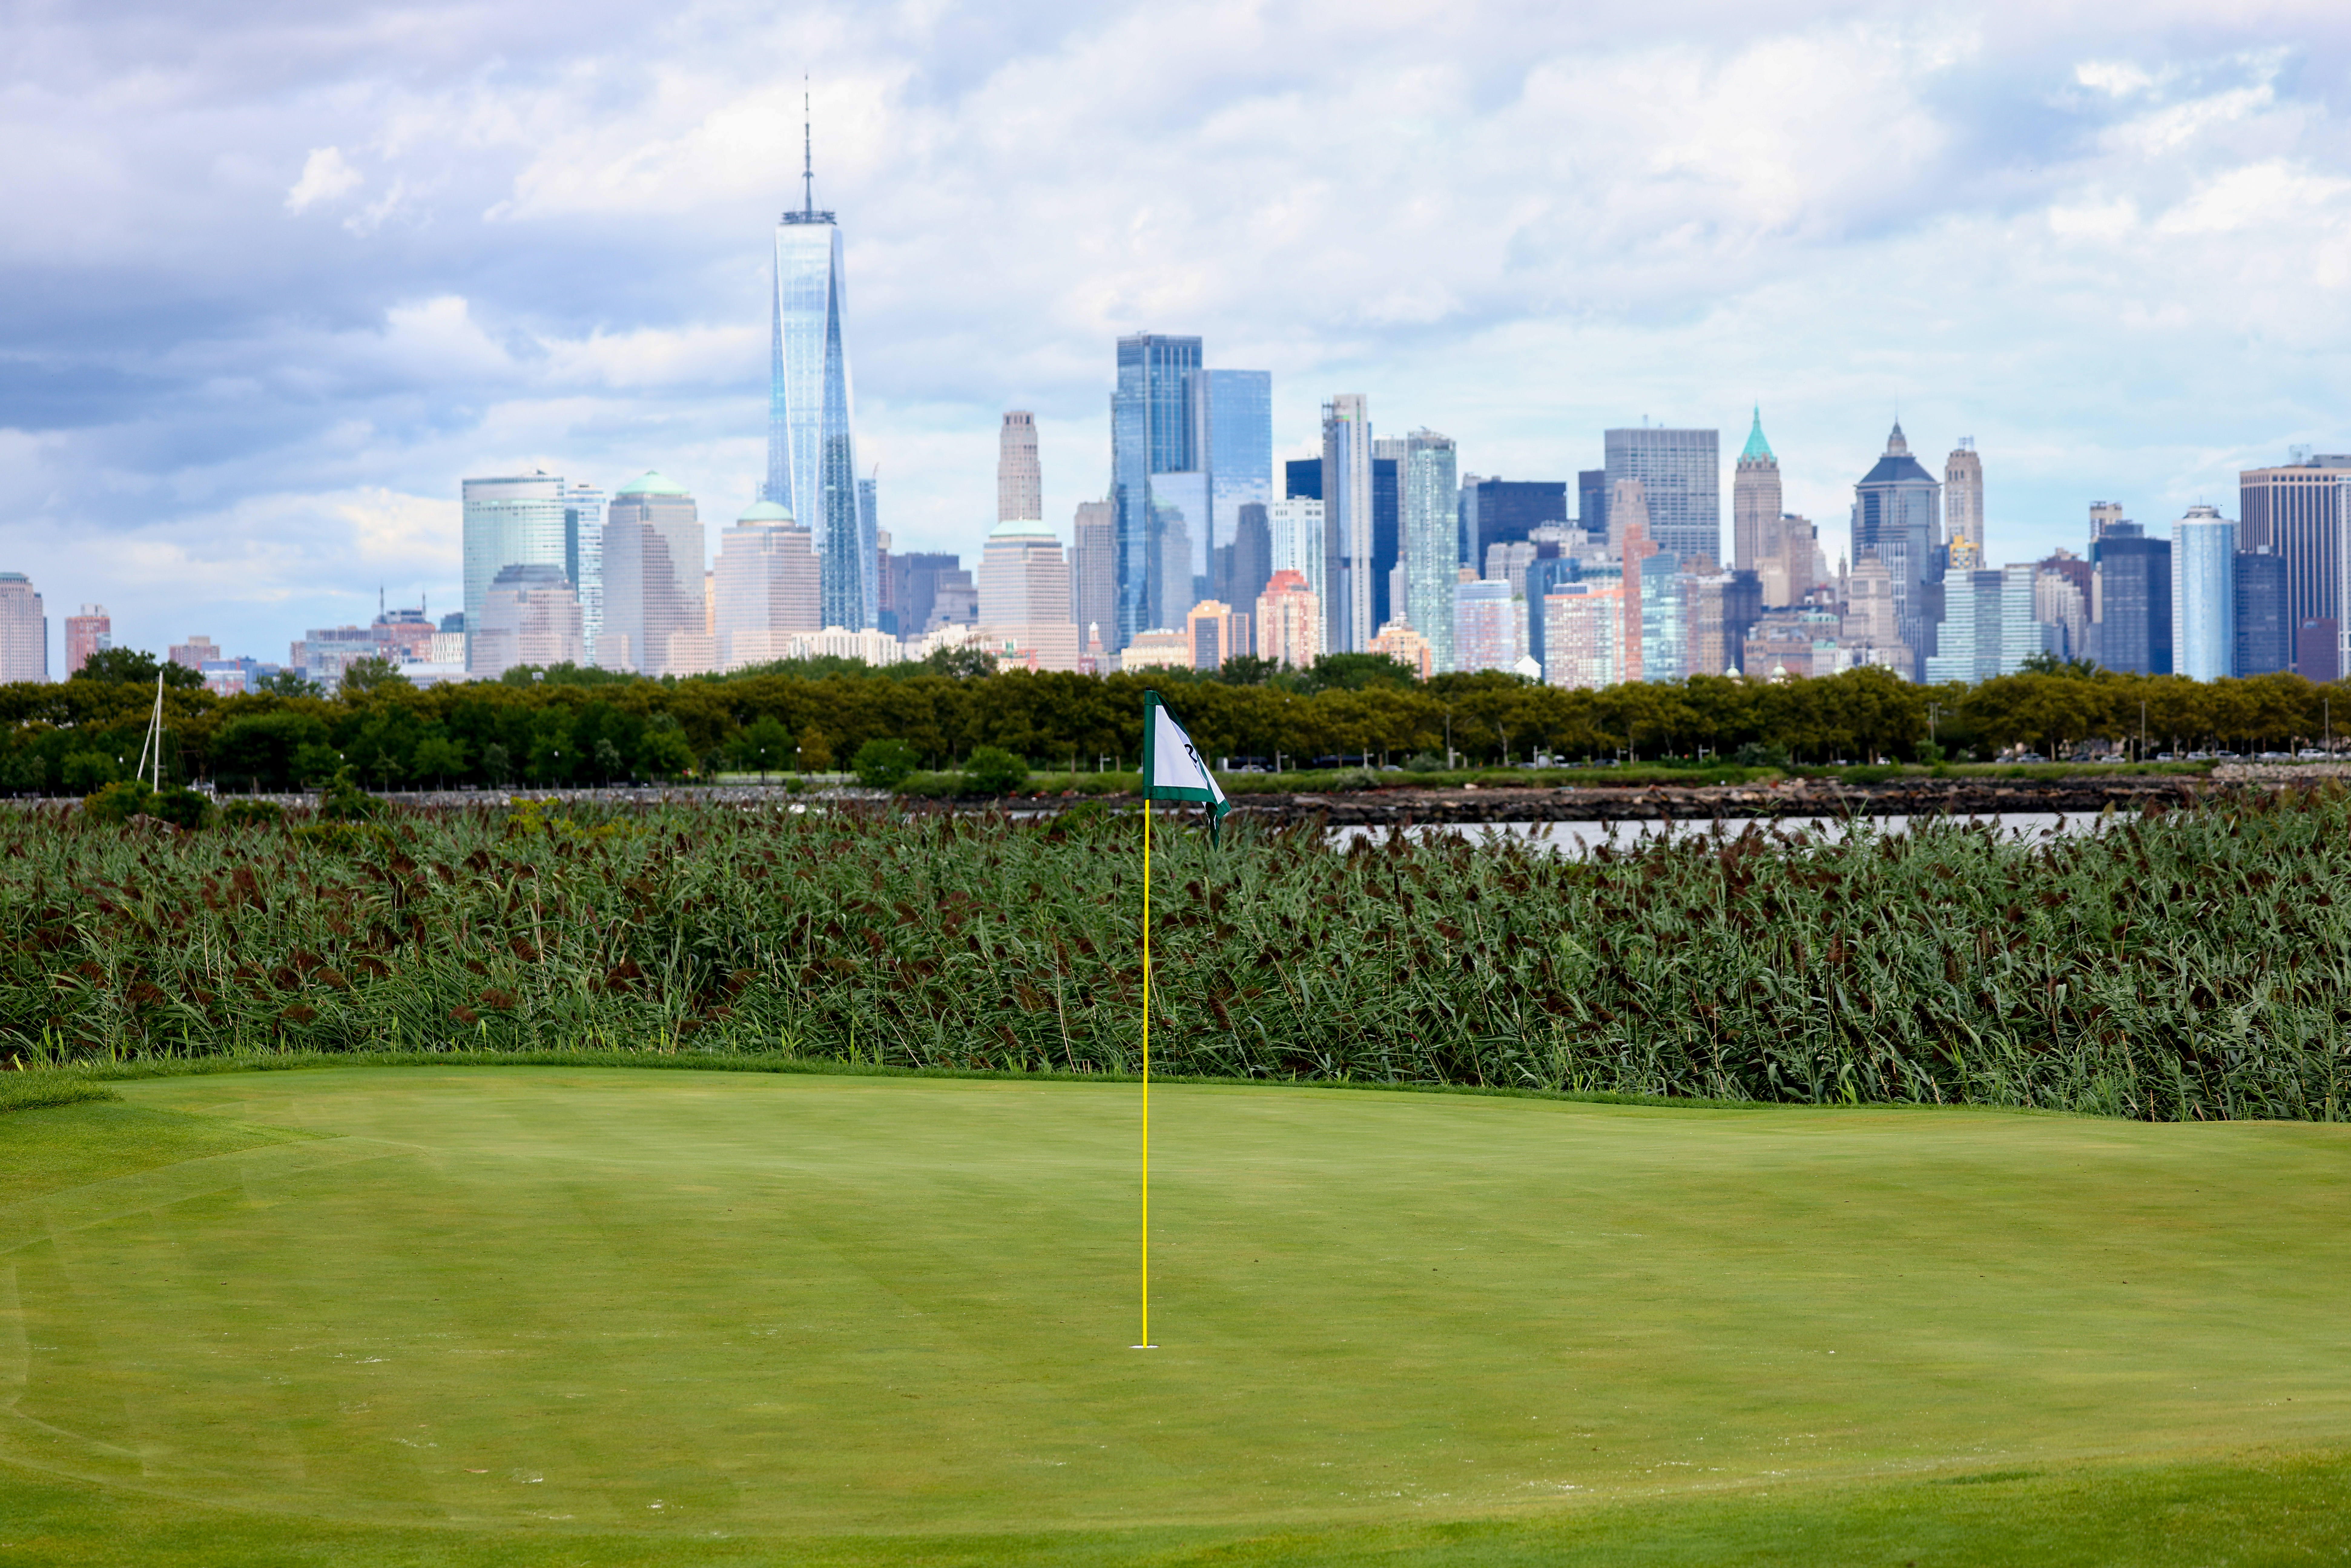 Michelle Wie West set to host new LPGA event at Liberty National in 2023 with unique junior element